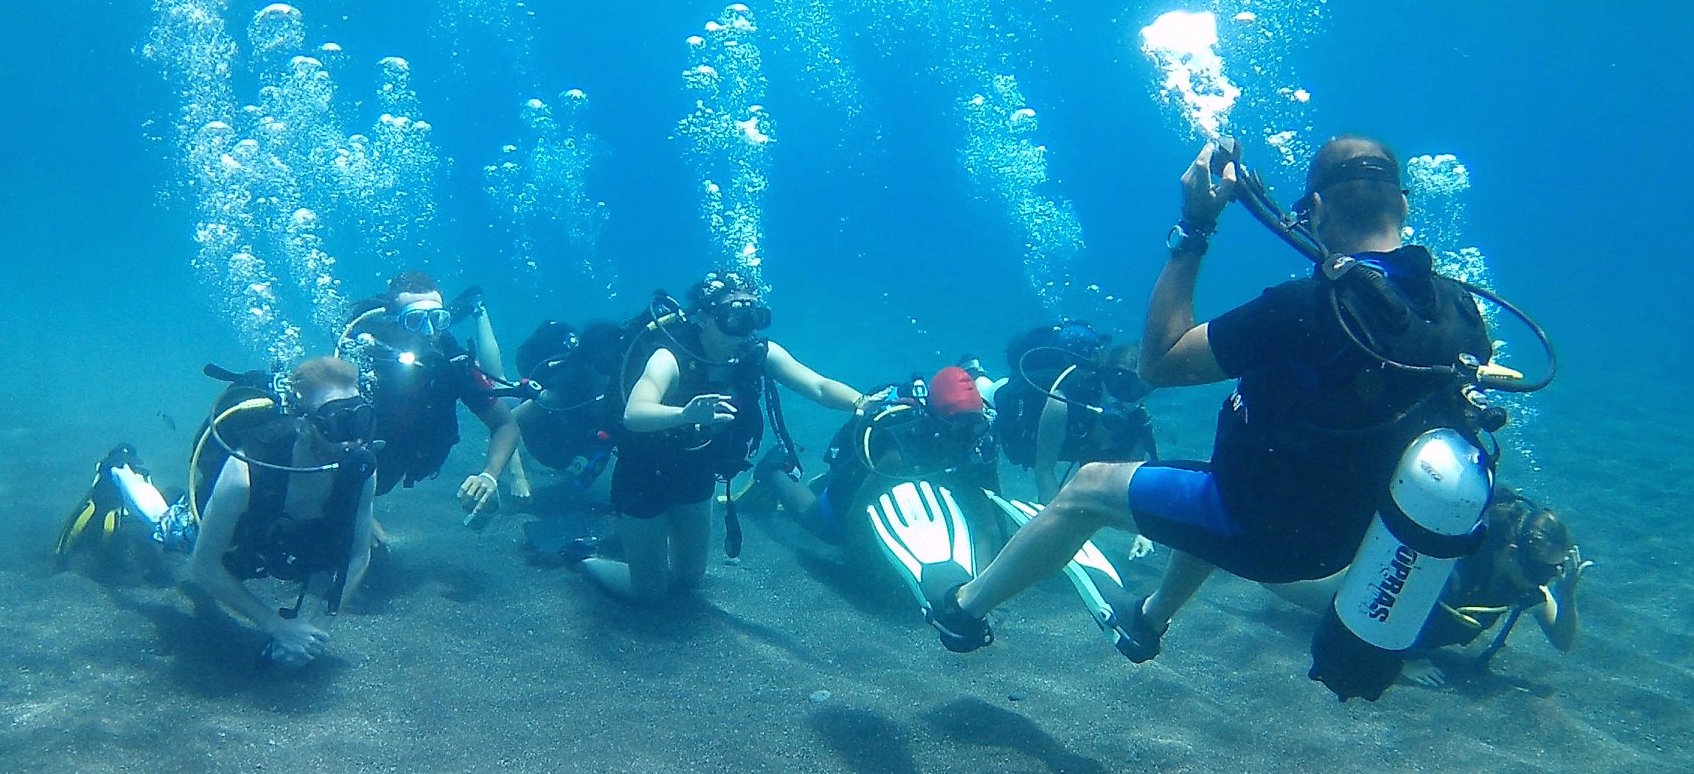 Scuba diving is a lot of fun